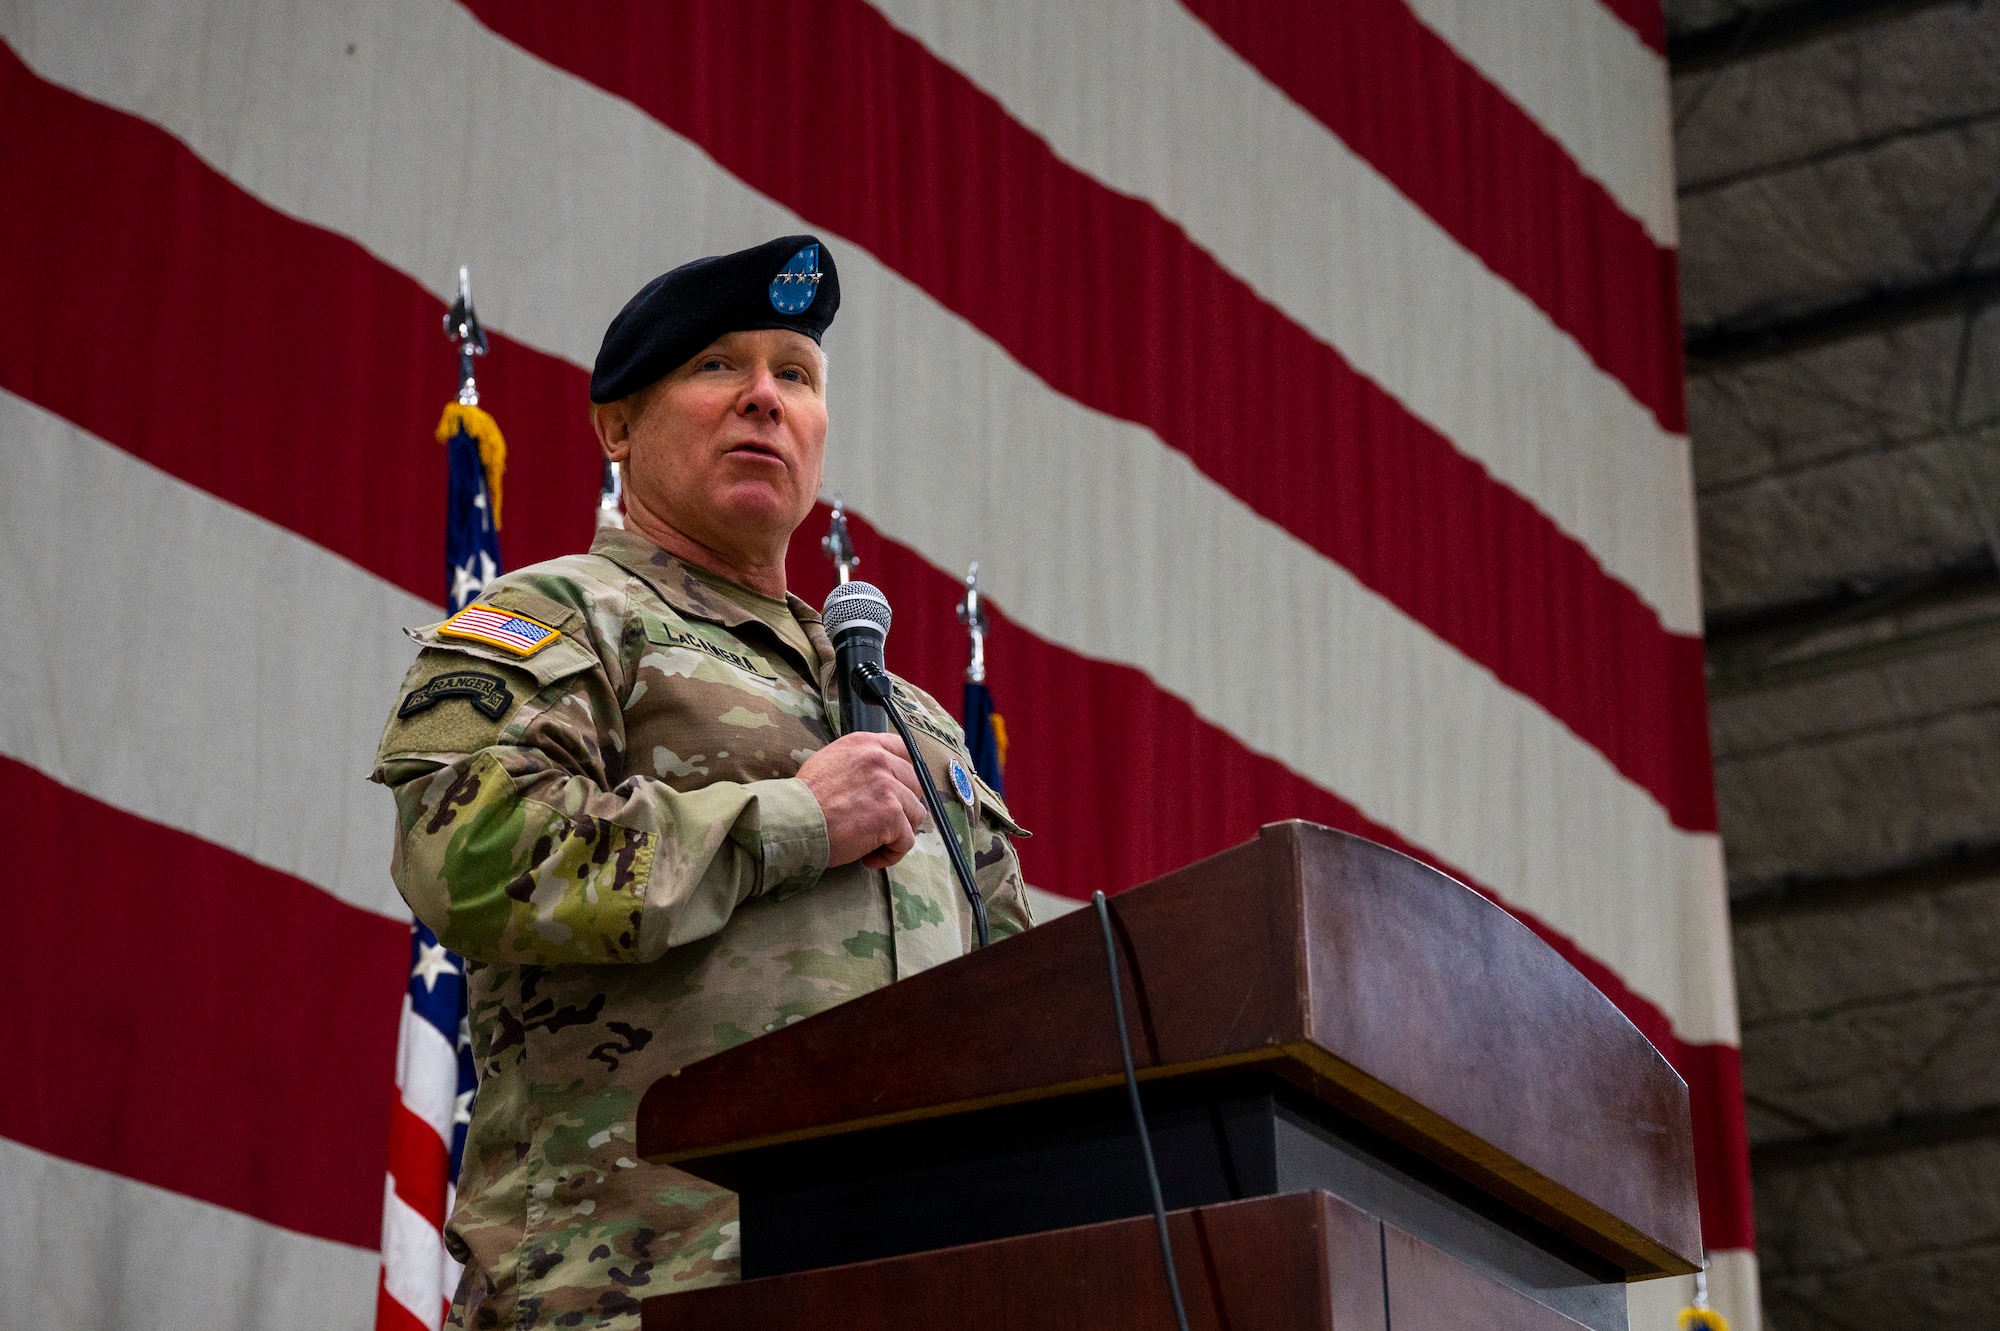 U.S. Army Gen. Paul LaCamera holds a microphone while speaking behind a podium in front of a large U.S. flag backdrop.